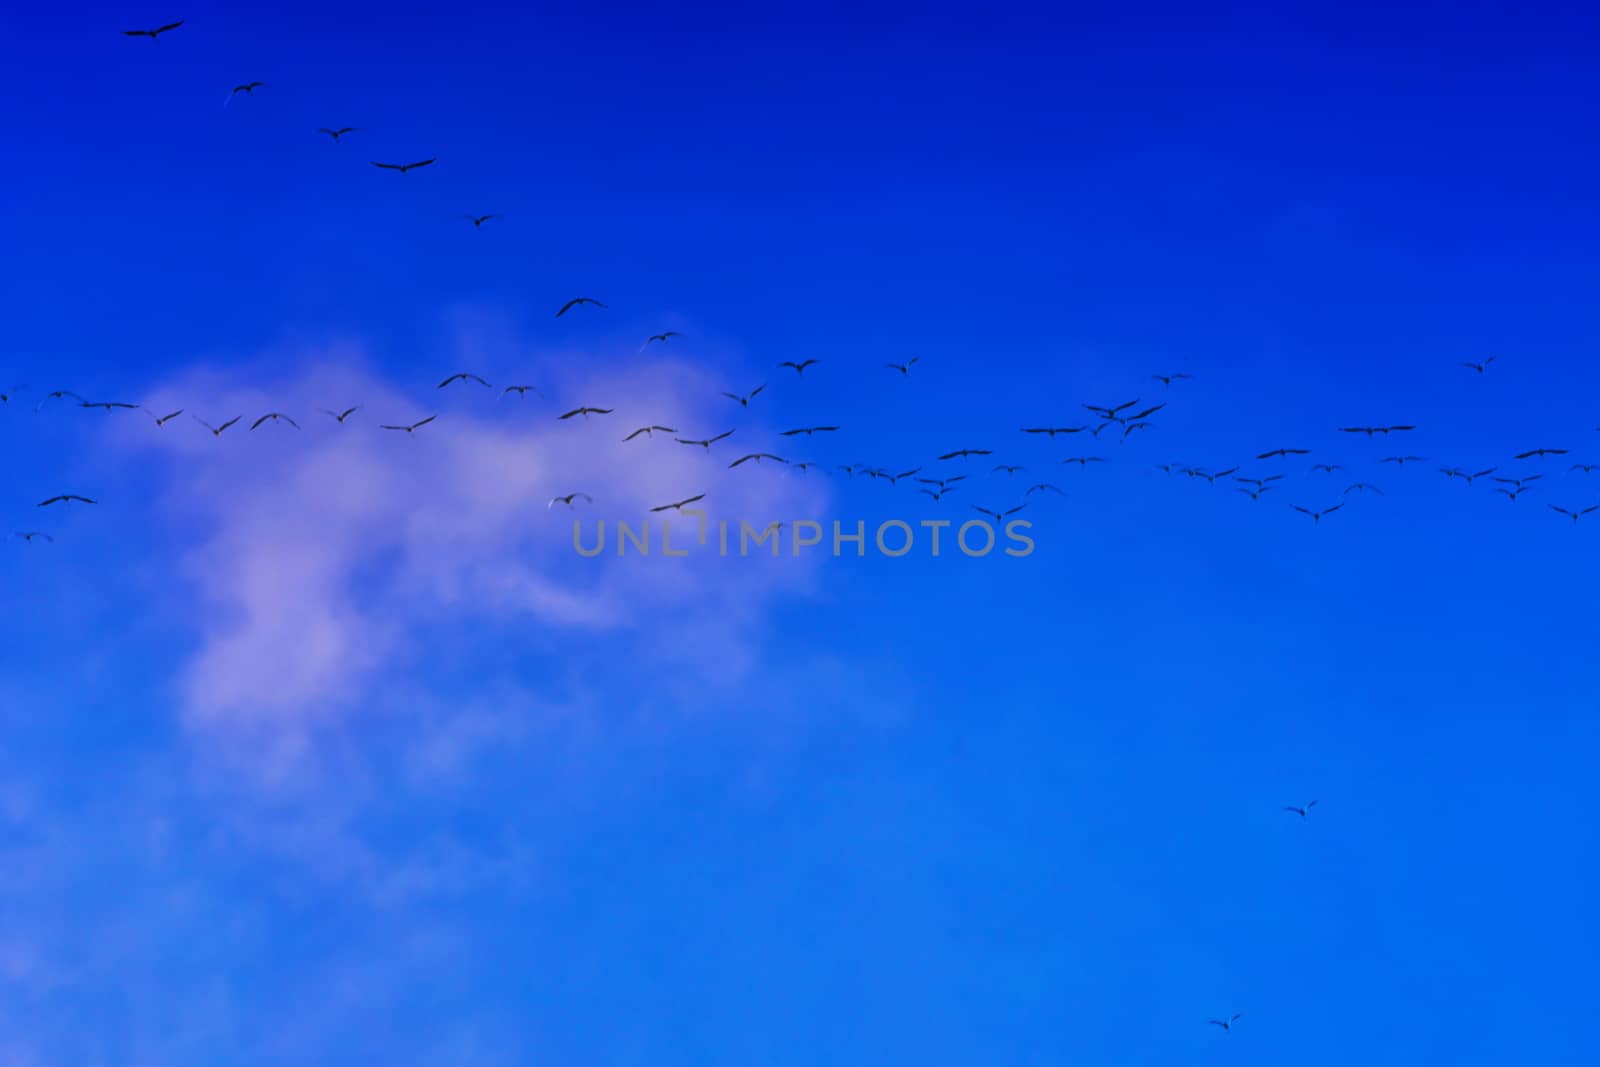 A group of migratory birds in autumn in the background blue sky.